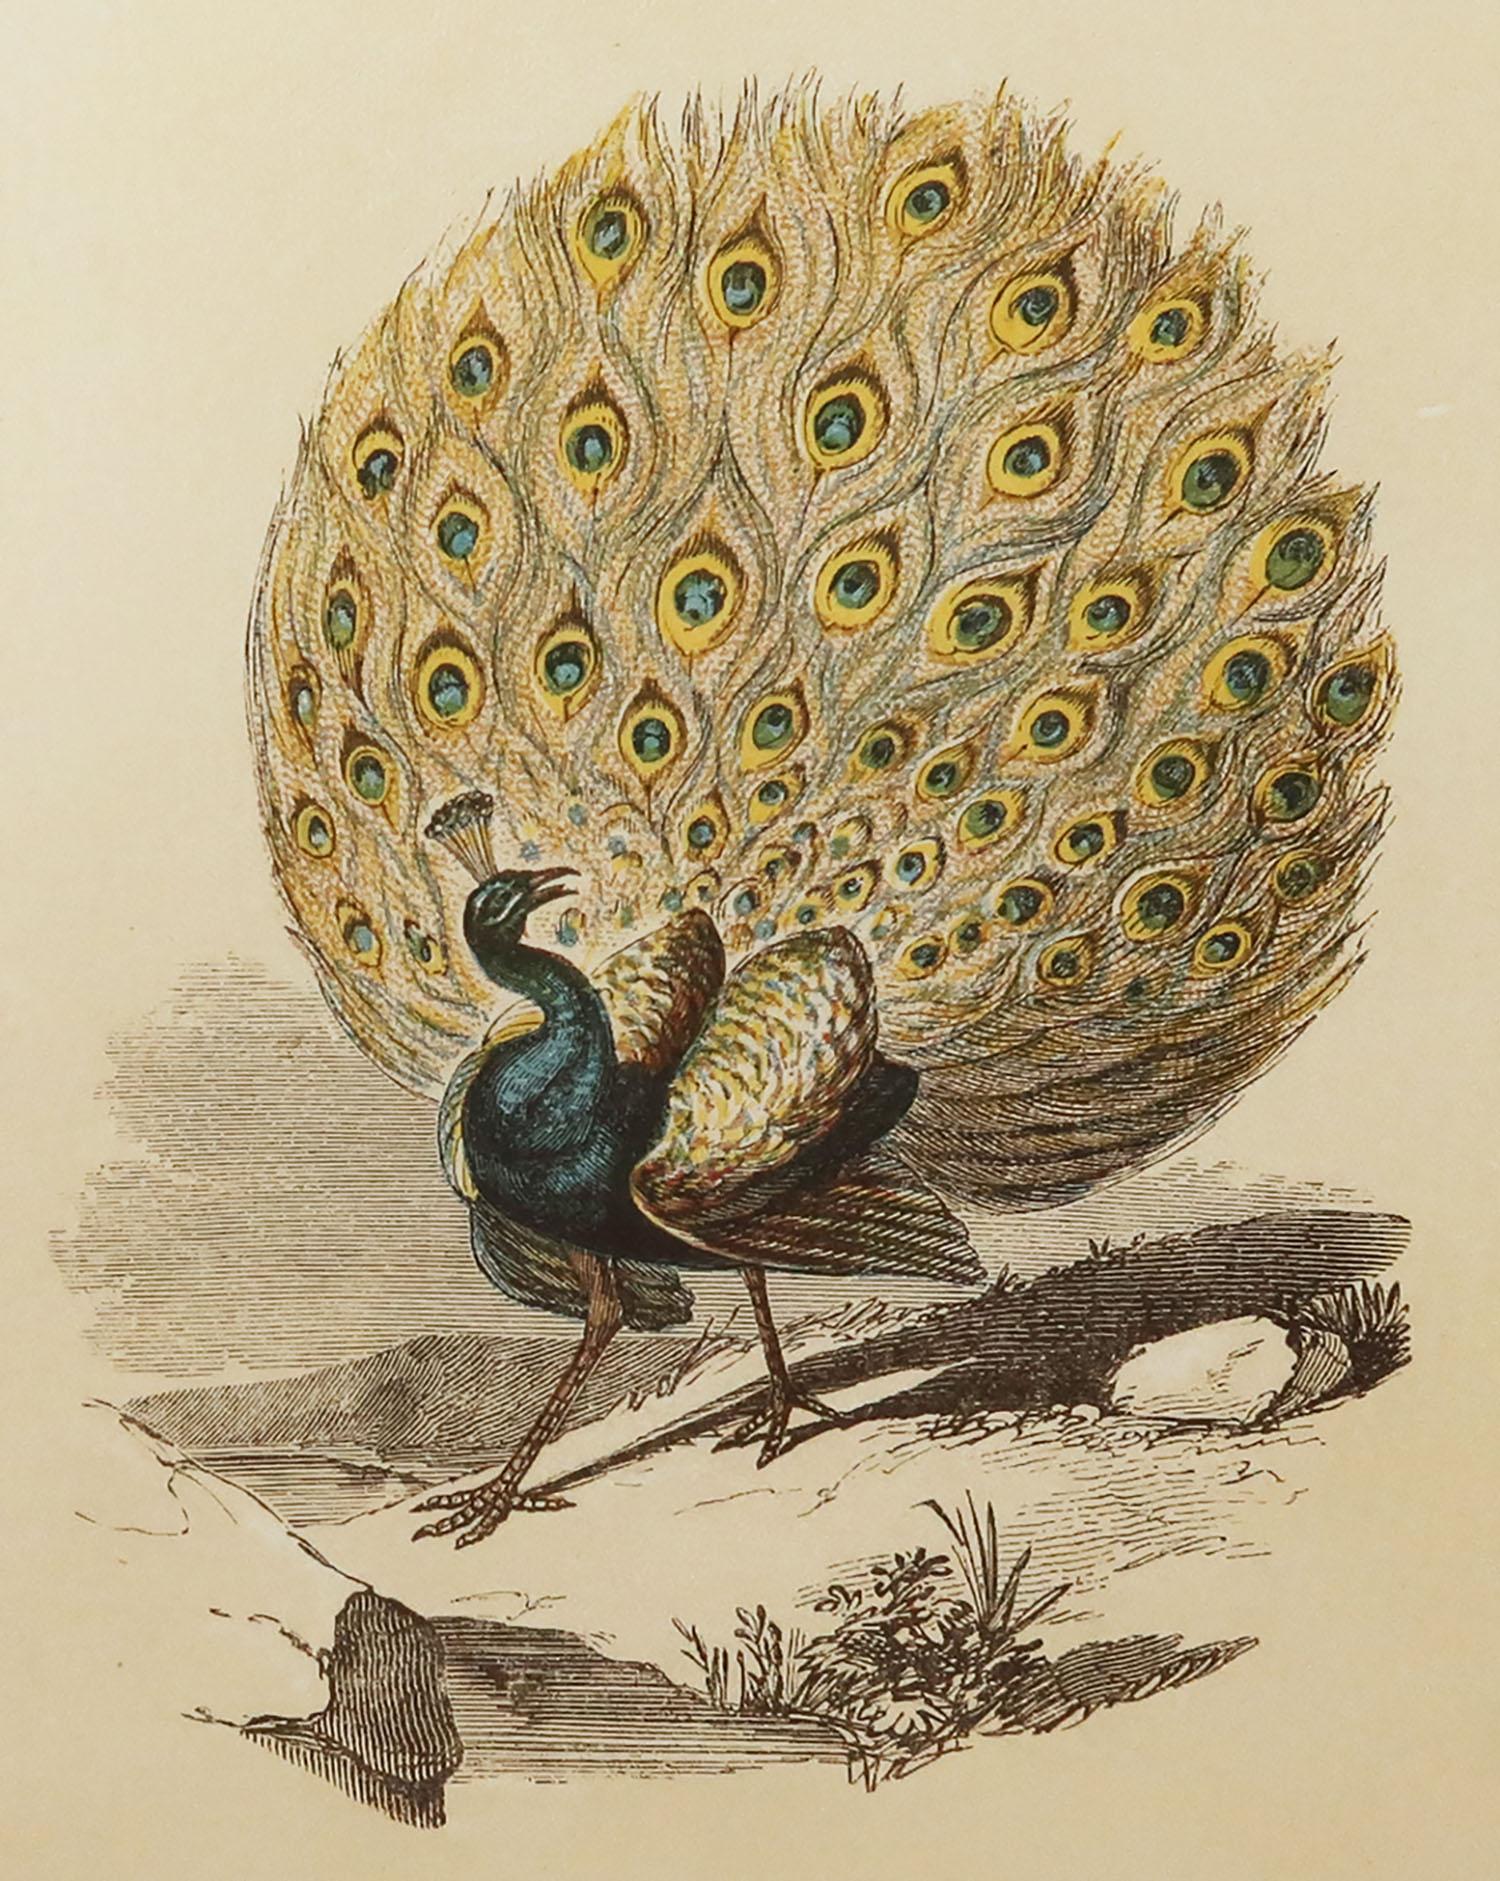 Great image of a peacock

Unframed. It gives you the option of perhaps making a set up using your own choice of frames.

Lithograph with original color.

Published by Tallis circa 1850

Crudely inscribed title has been erased at the bottom